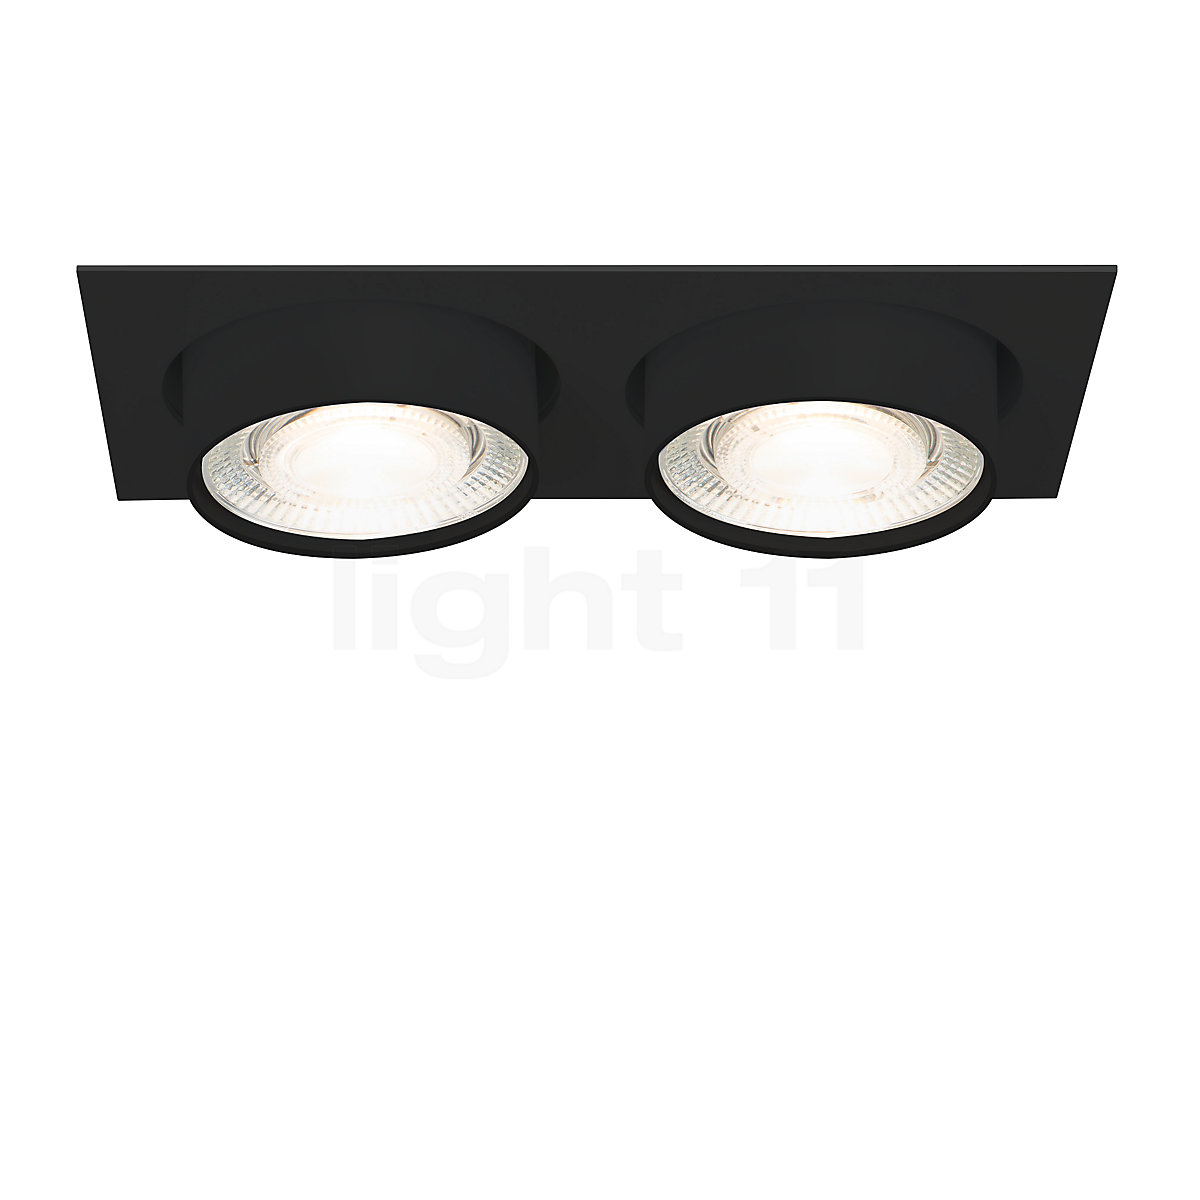 Buy Mawa Wittenberg 4 0 Recessed Ceiling Light Angular With Two